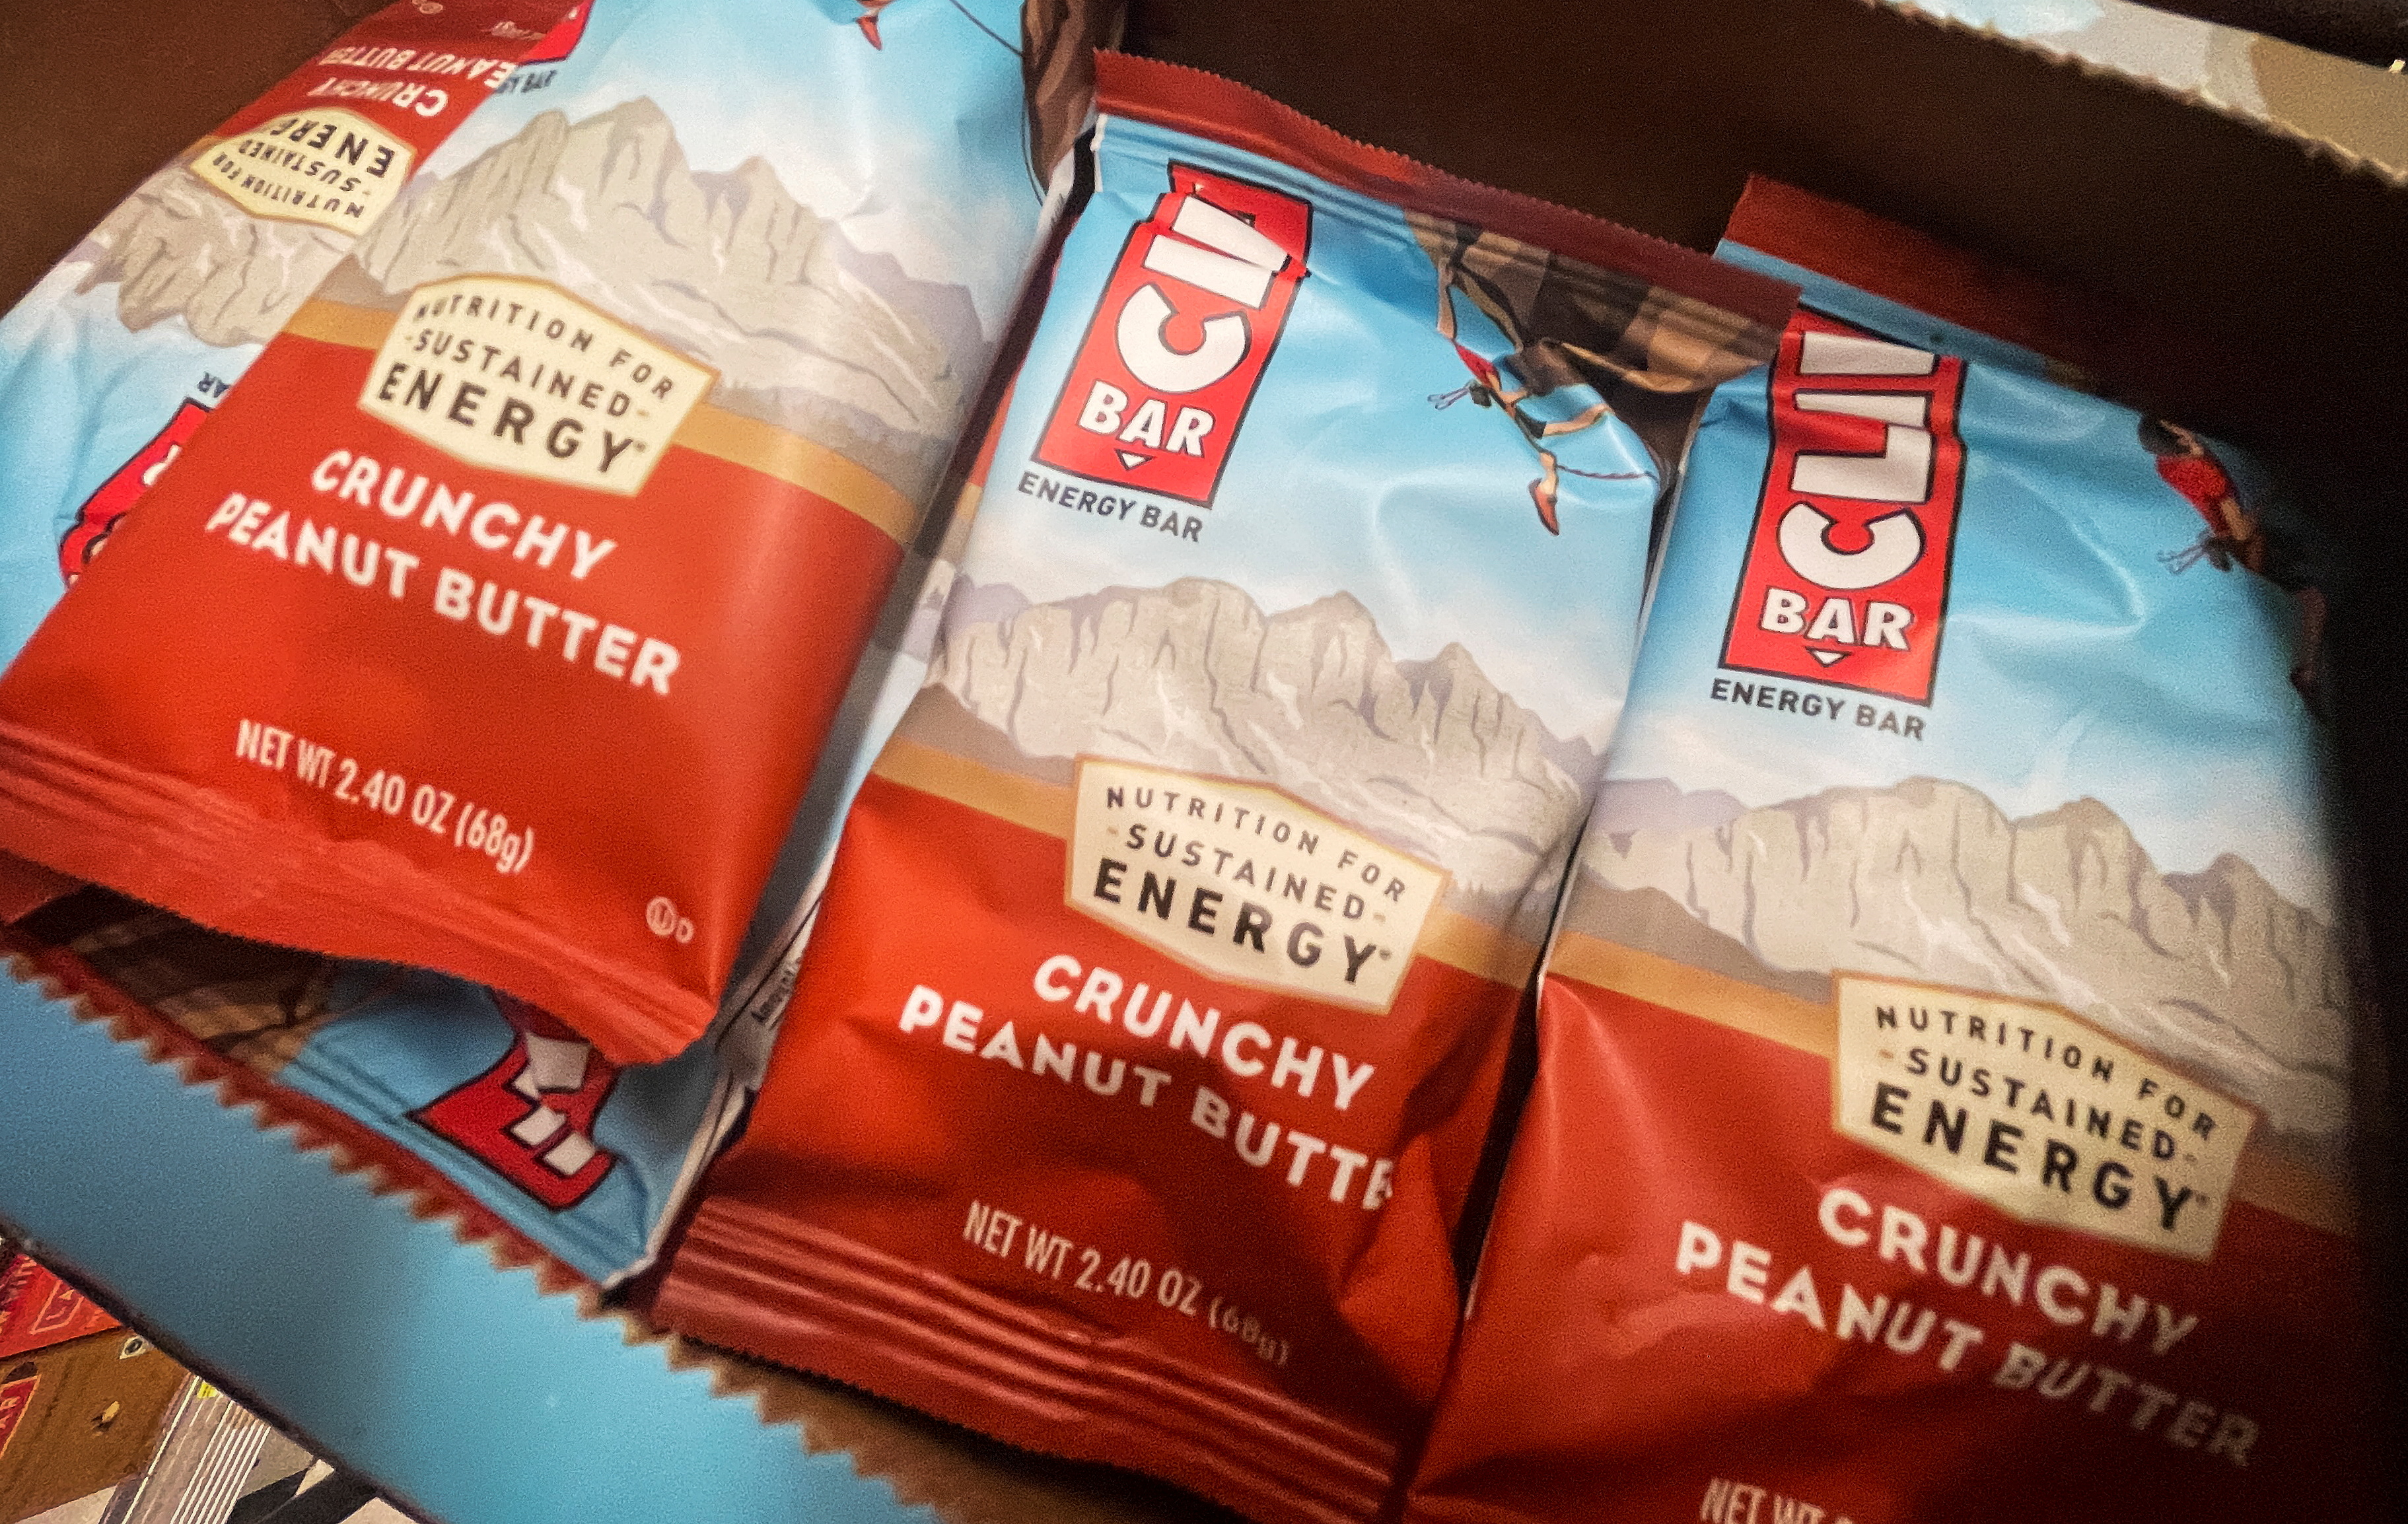 Energy bar maker Clif Bar & Company Products are pictured in New York